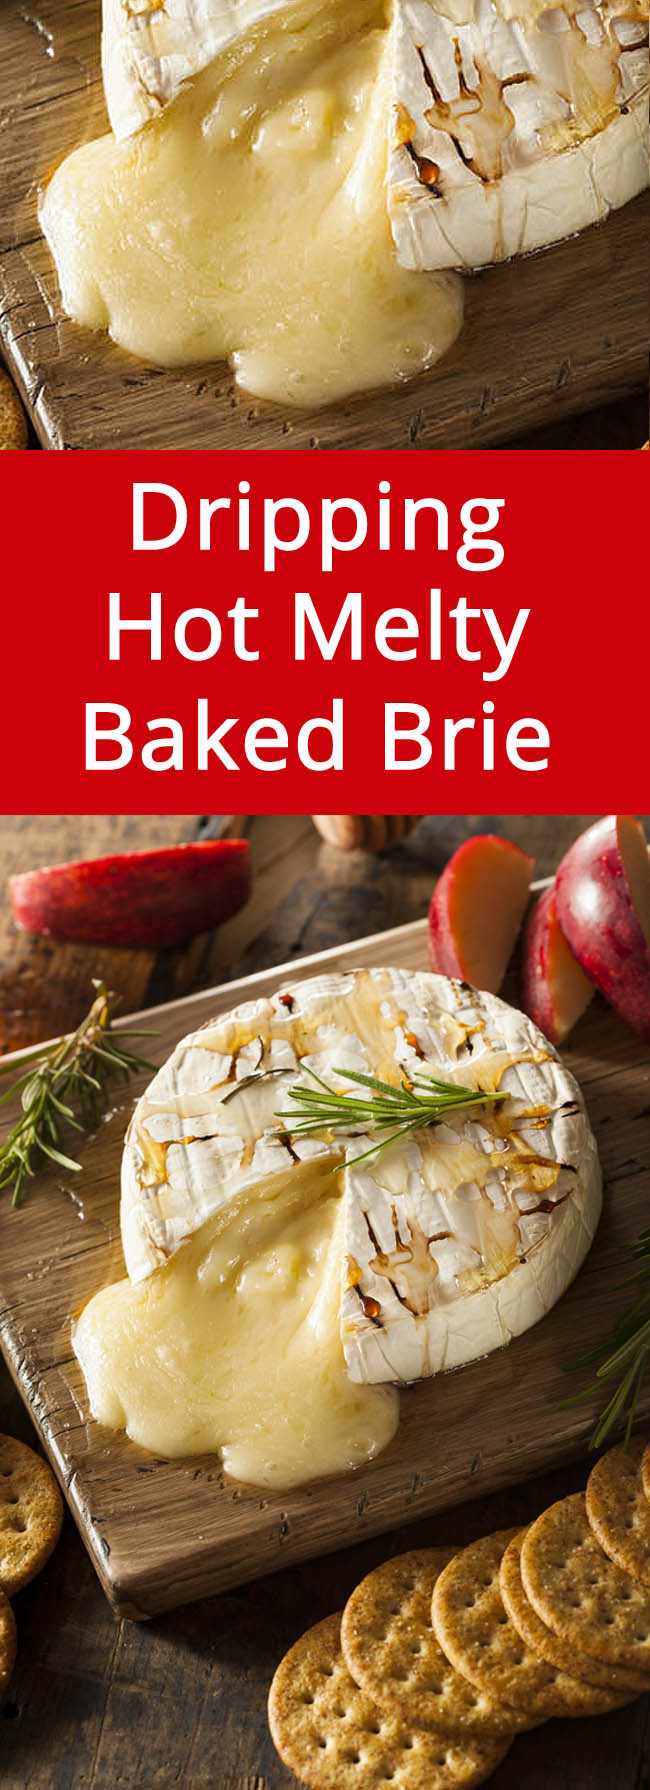 Brie Cheese Appetizers
 Easy Baked Brie Cheese Appetizer Recipe With Honey